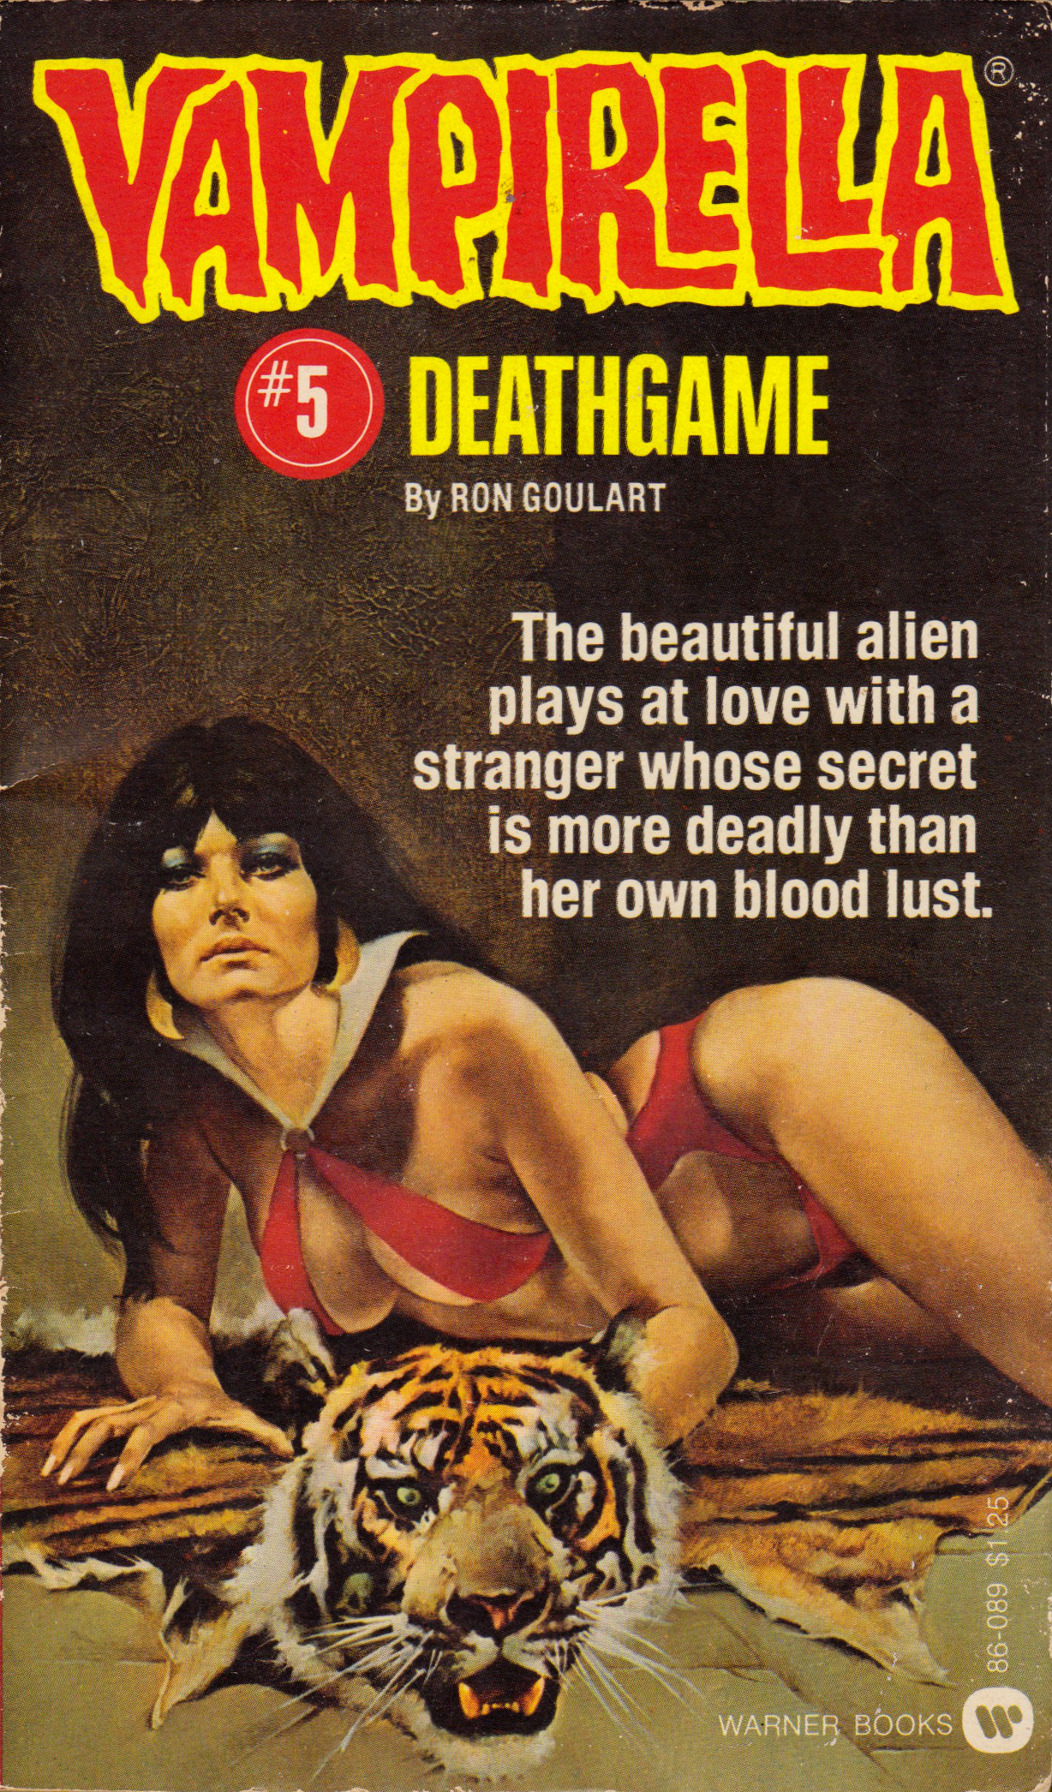 Vampirella No.5: Deathgame, by Ron Goulart (Warner Books, 1976).From Oxfam in Nottingham.